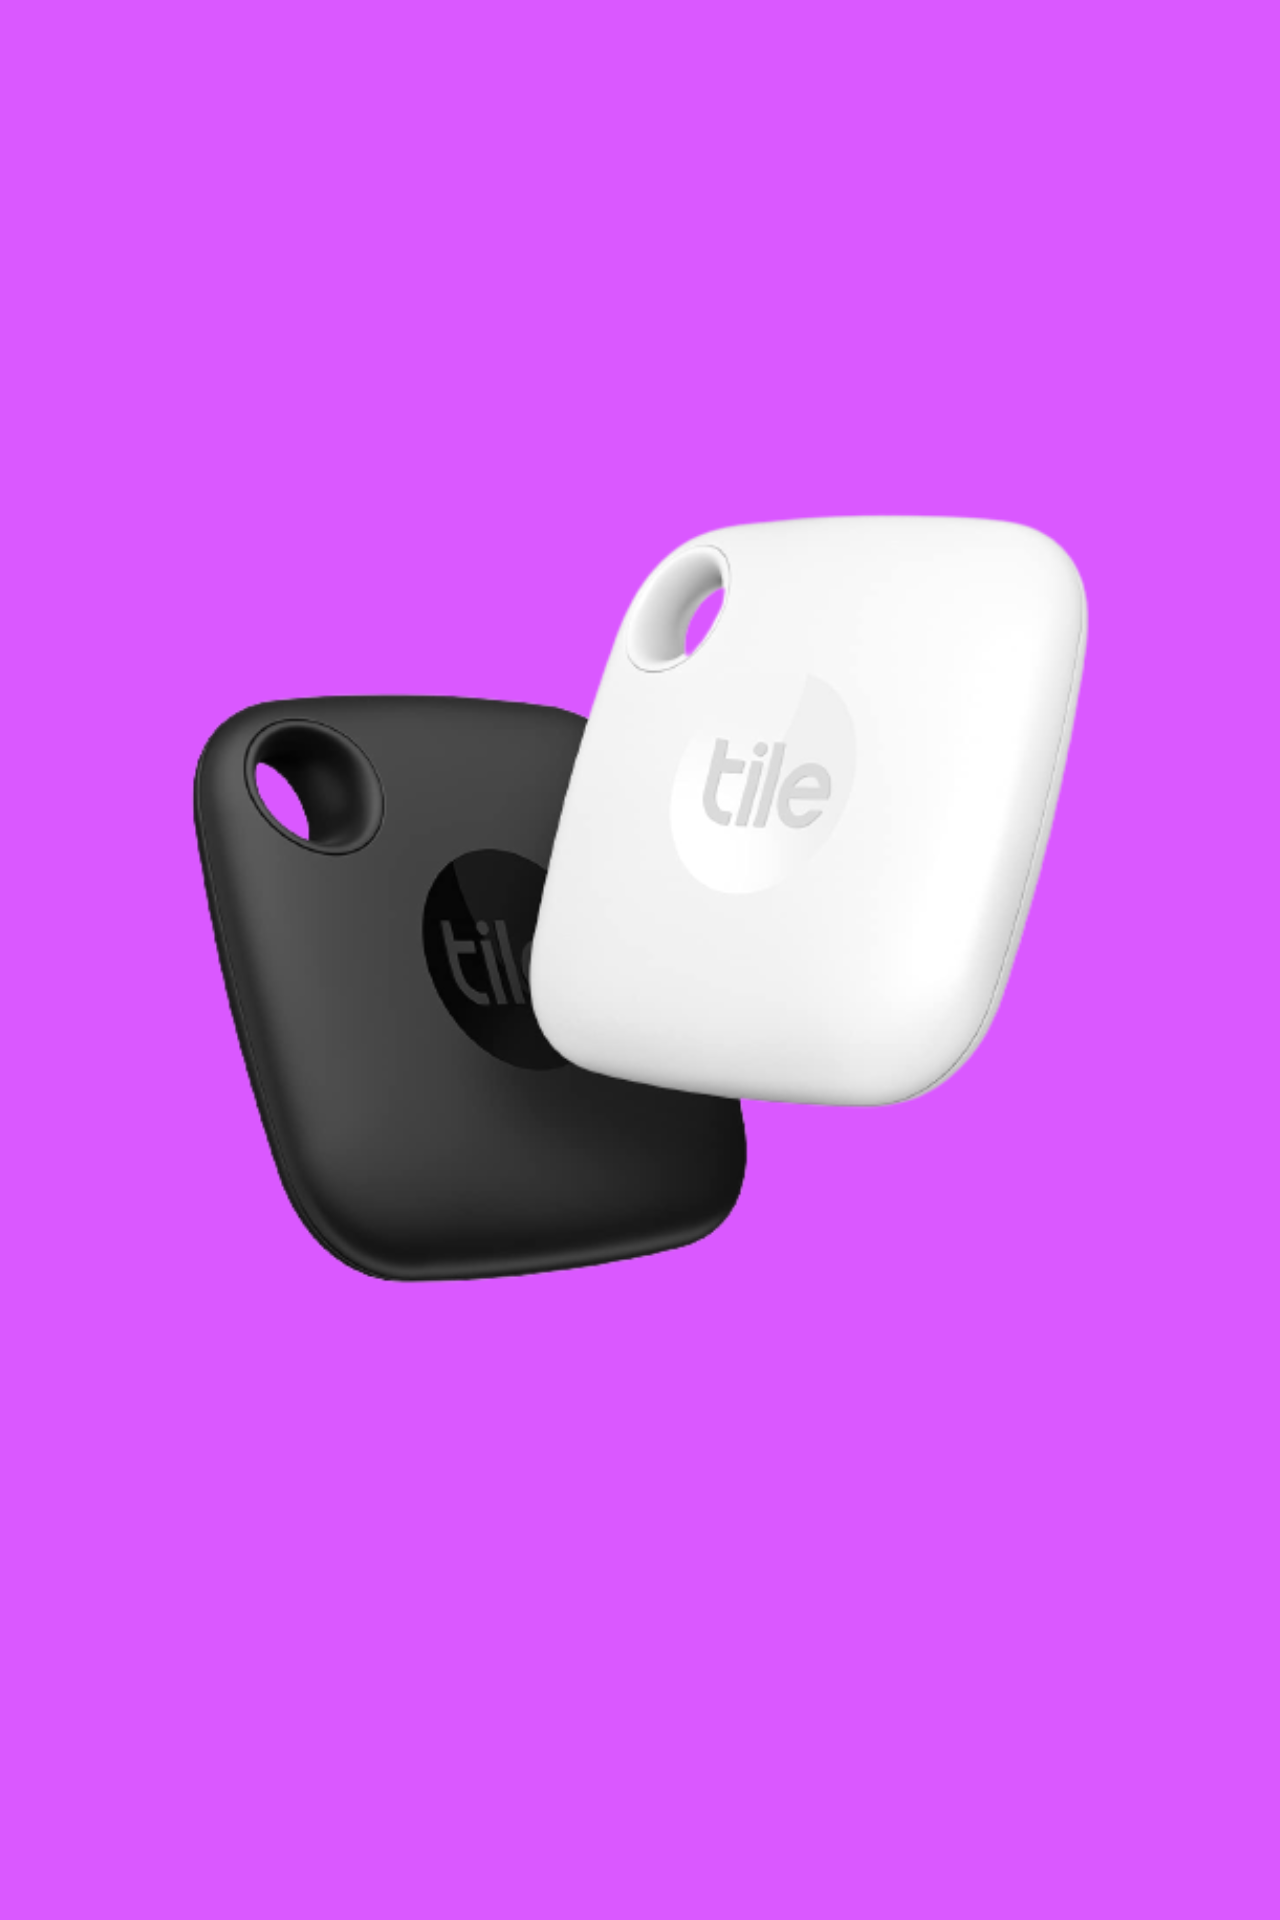 Tile Mate review: The Best AirTag alternative 2023